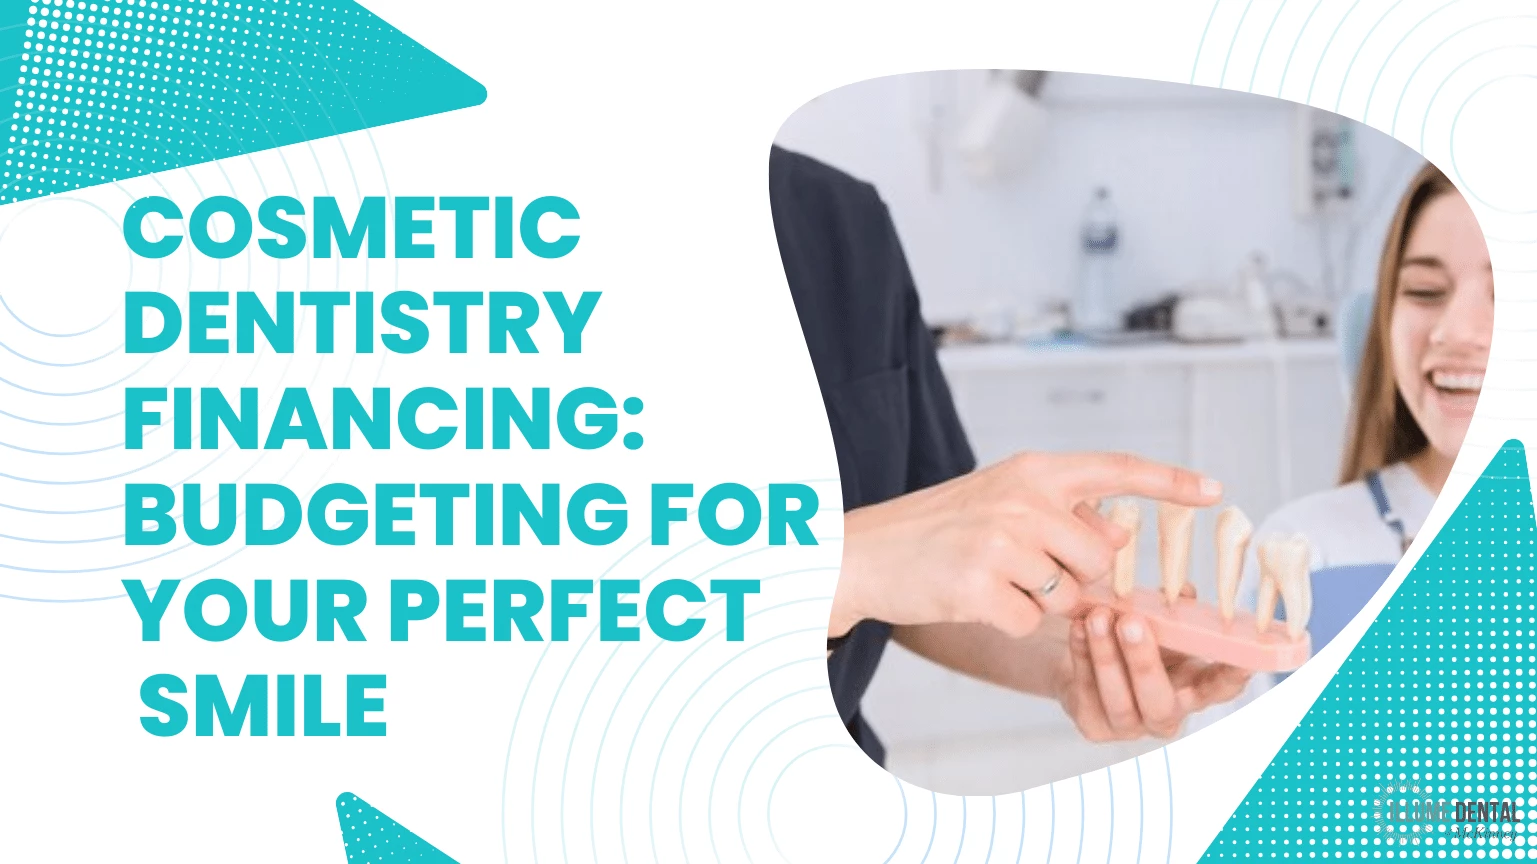 Cosmetic Dentistry Financing Budgeting for Your Perfect Smile